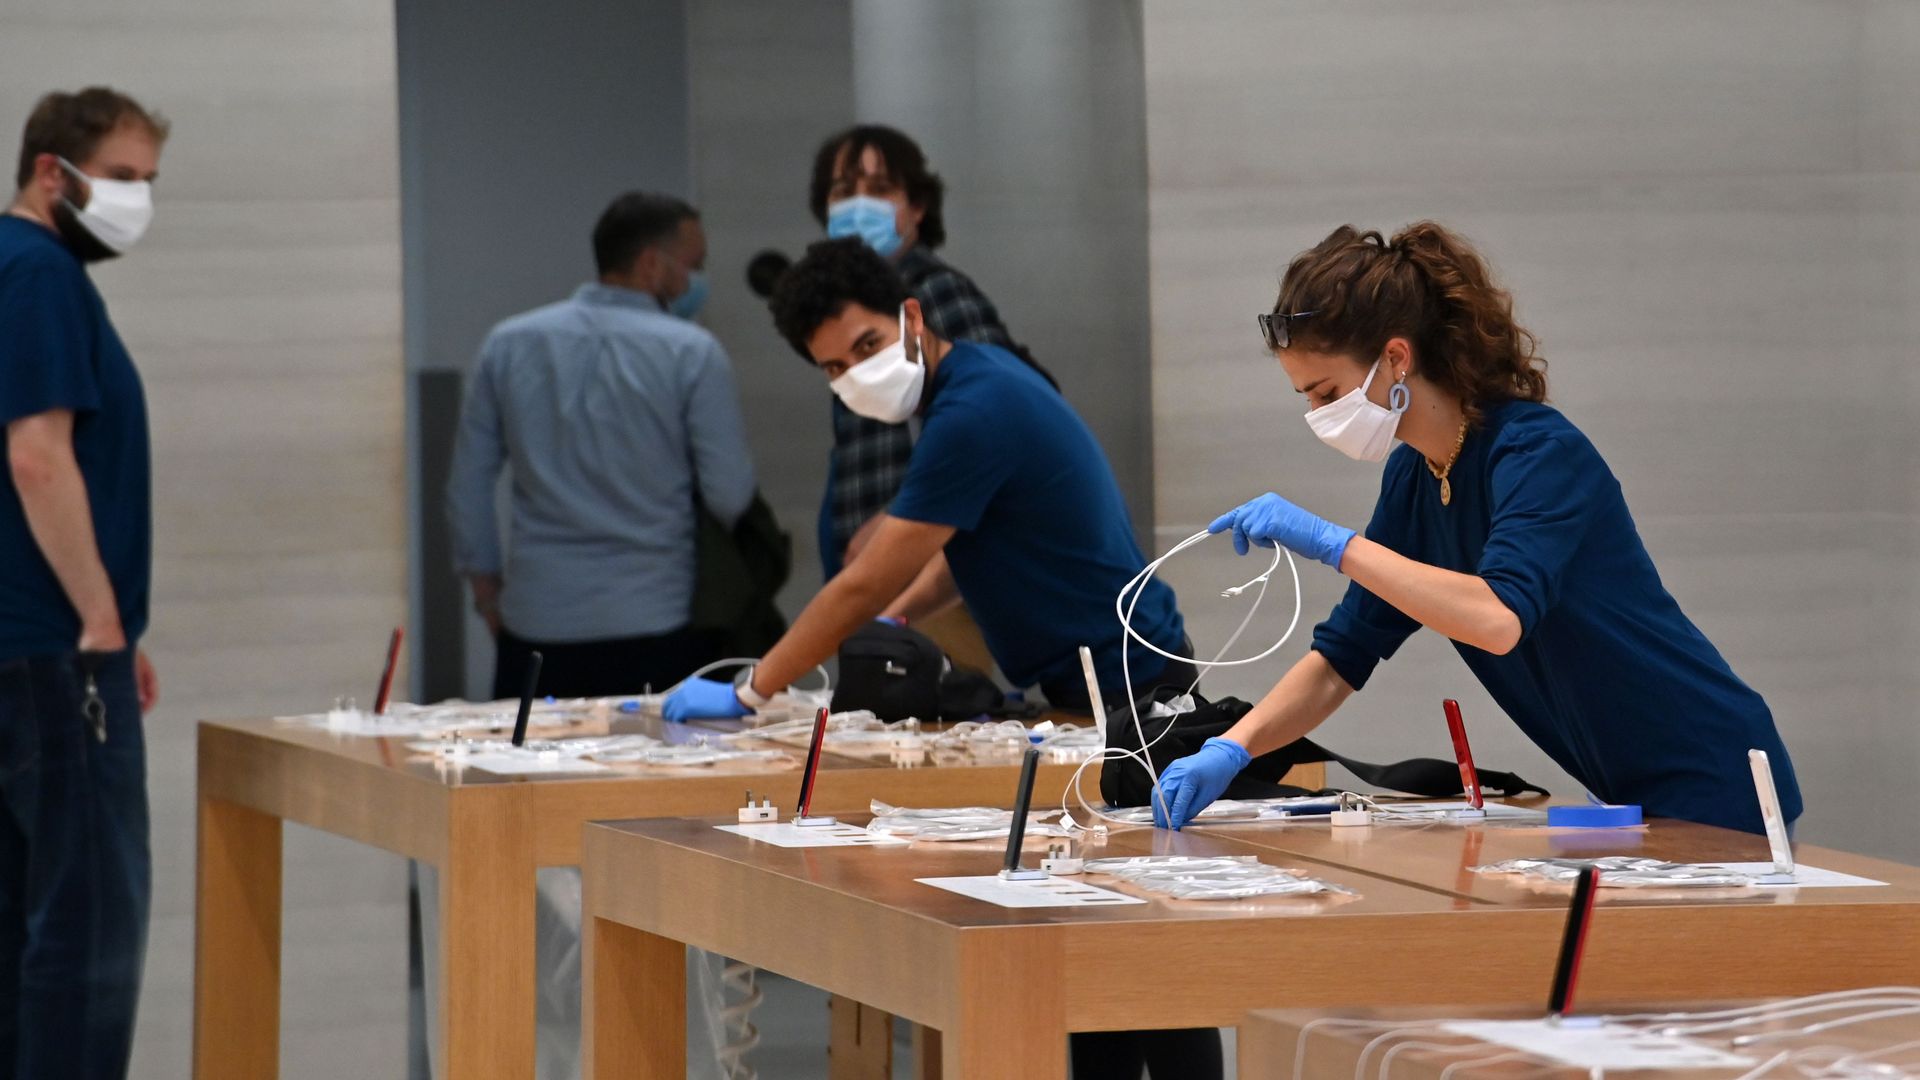 Apple store employees wear protective equipment and clean down stations. Photo: JUSTIN TALLIS/AFP via Getty Images